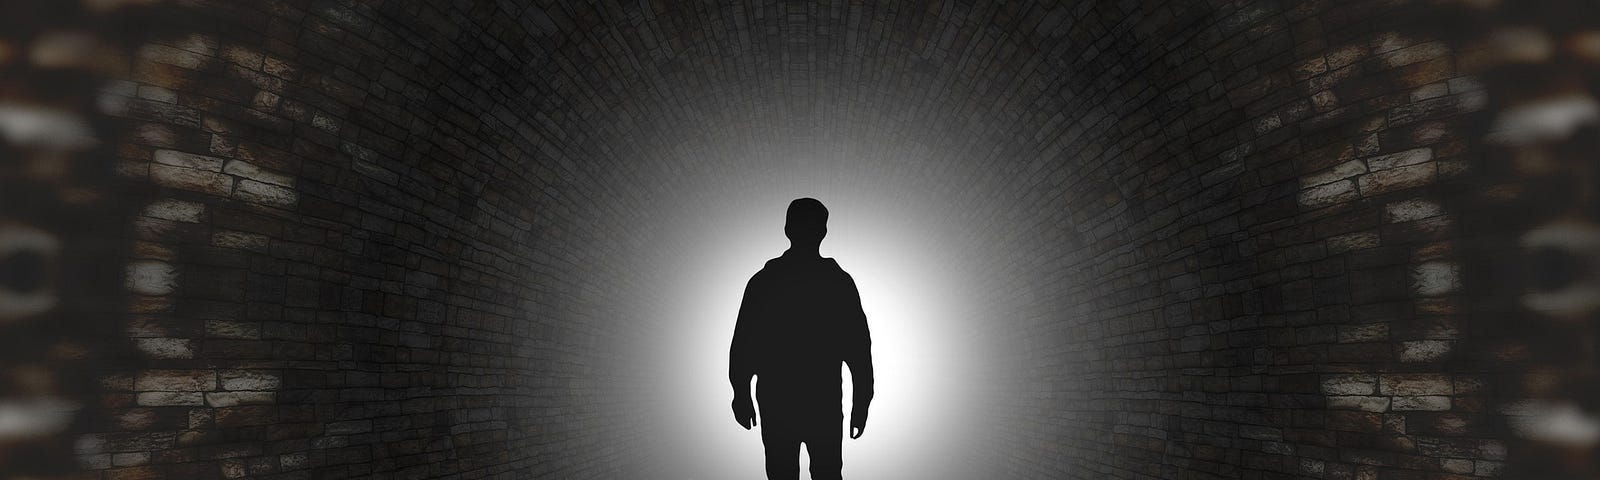 The image is dark, mostly black and shows a person (all black) entering a tunnel where light emanates from the background.